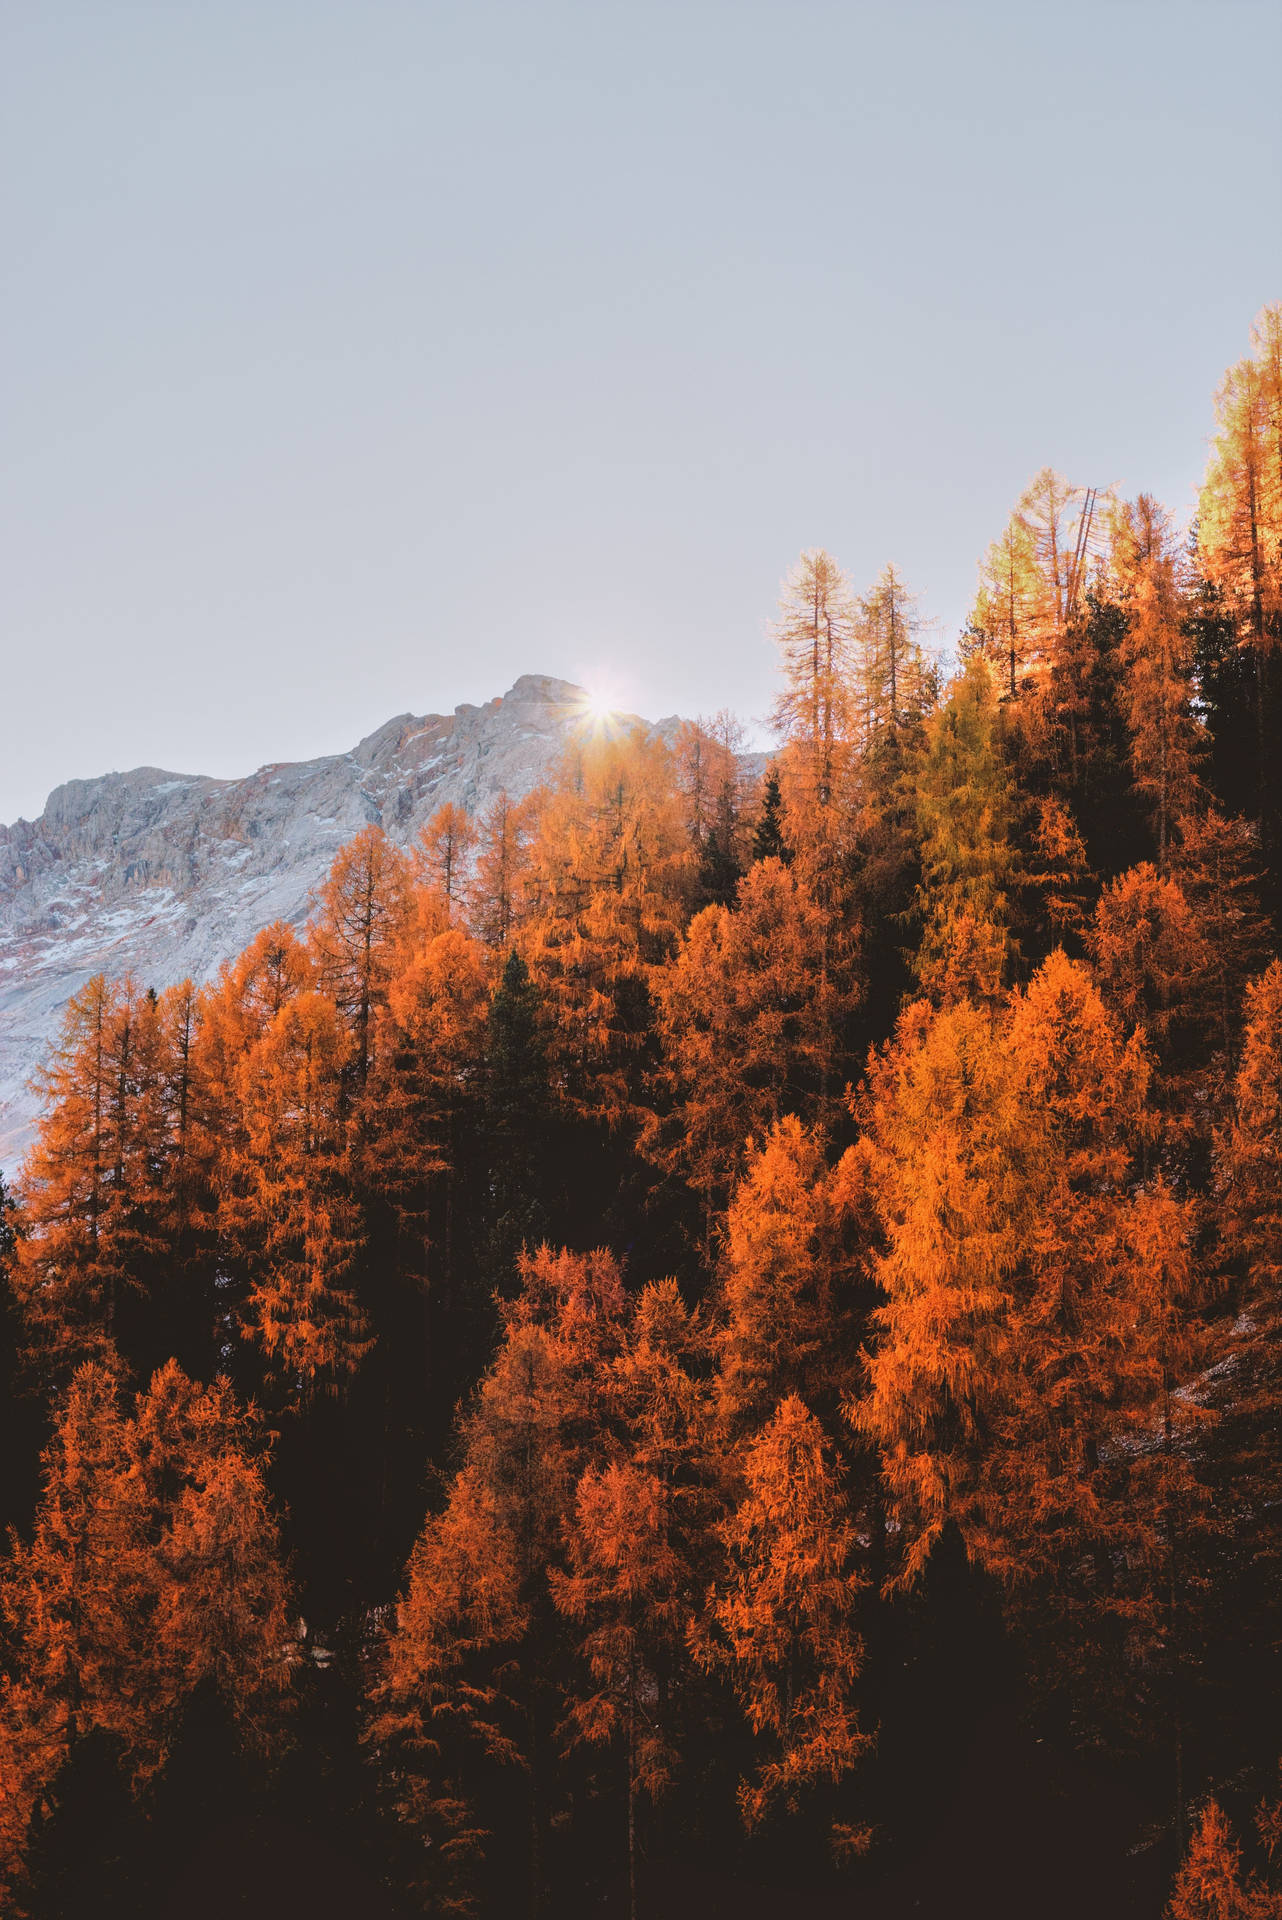 Autumn Pine Scenery For Iphone Screen Wallpaper